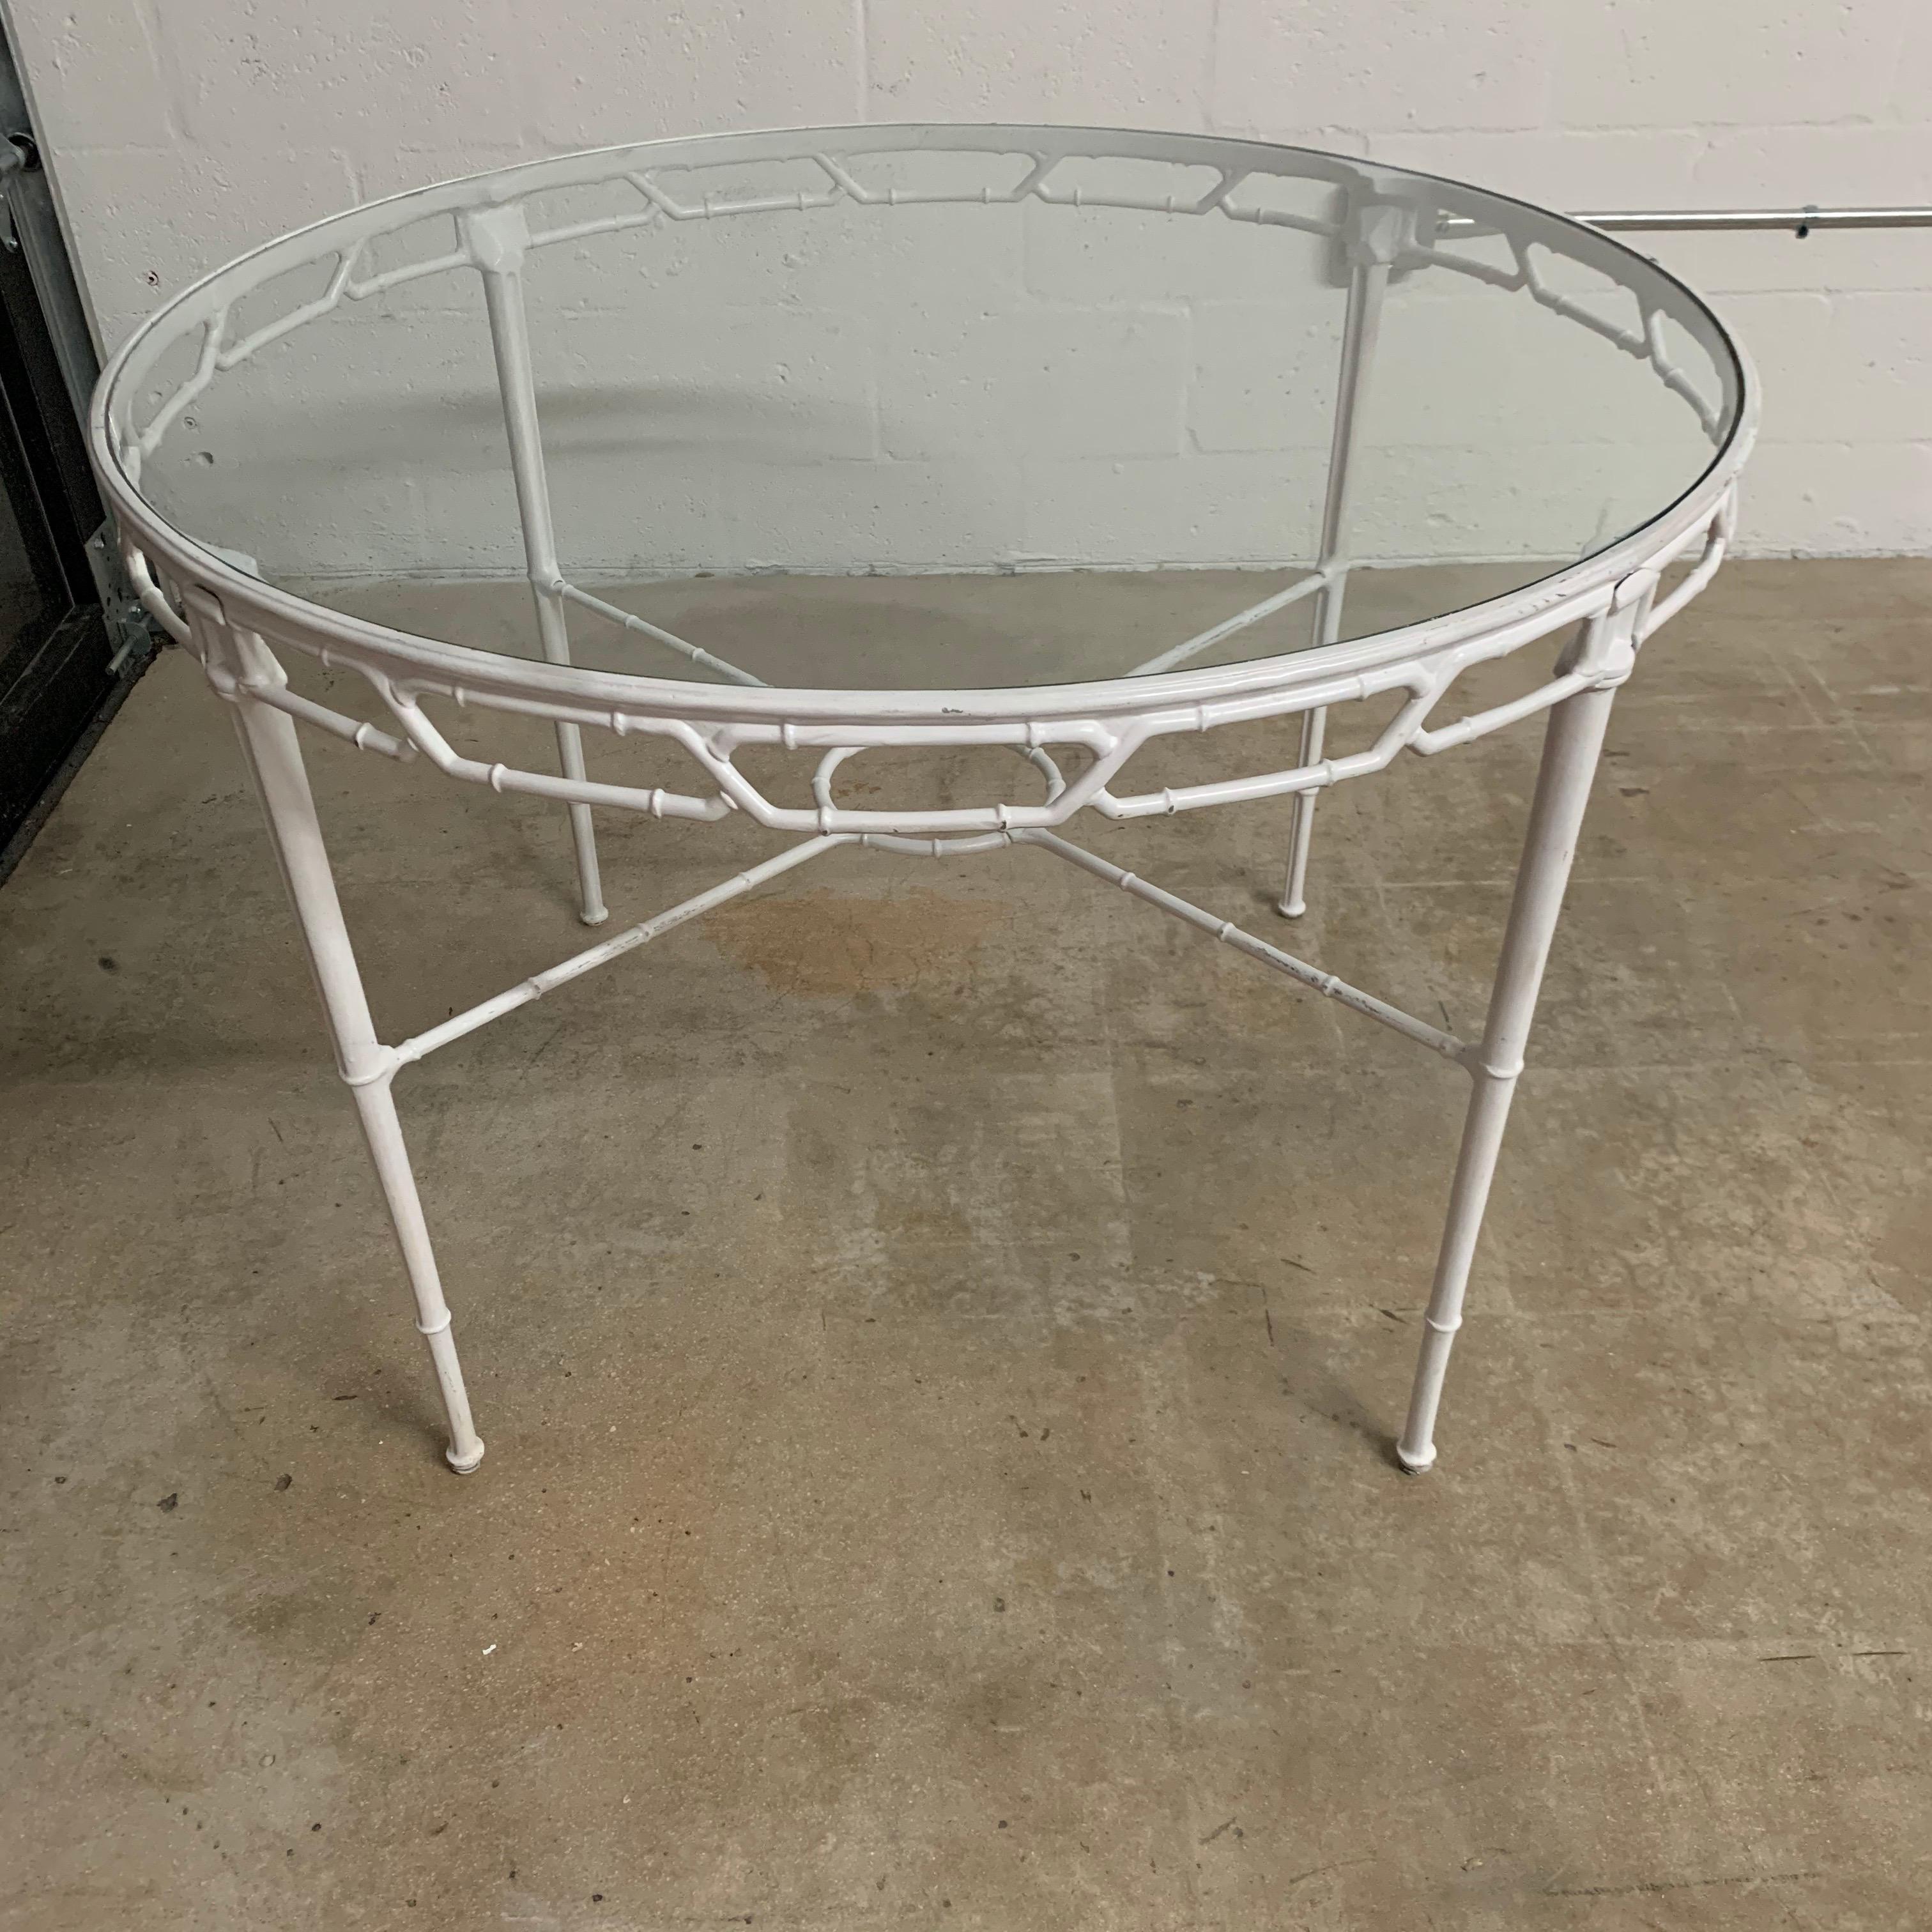 Classic Chinese Chippendale faux bamboo dining table for outdoor, garden, or patio rendered in original white powder-coated cast aluminum with a glass top. Designed by Hall Bradley for Brown Jordan, 1967.

Larger Oval Dining Table also available.
  